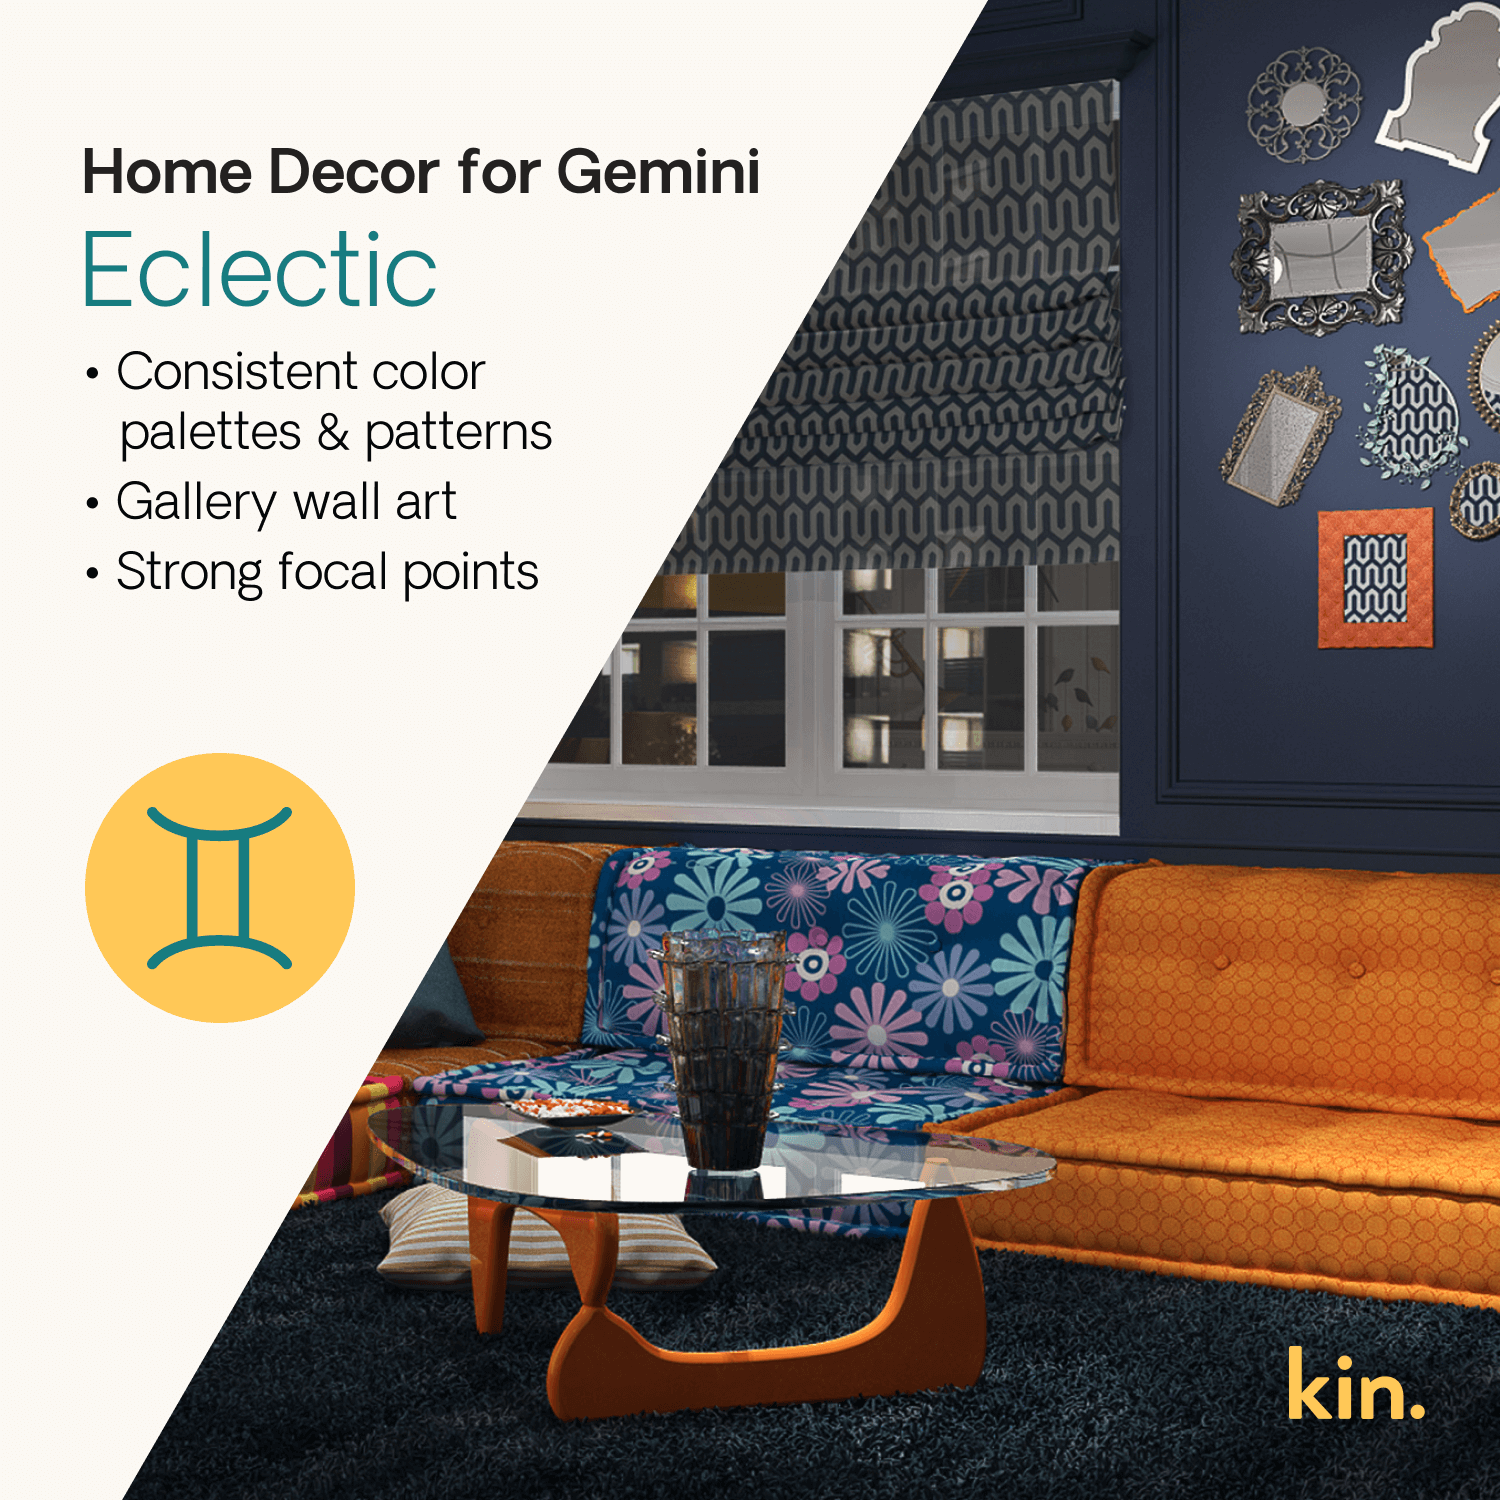 Home Decor for Gemini: Eclectic Consistent color palettes & patterns Gallery wall art Strong focal points